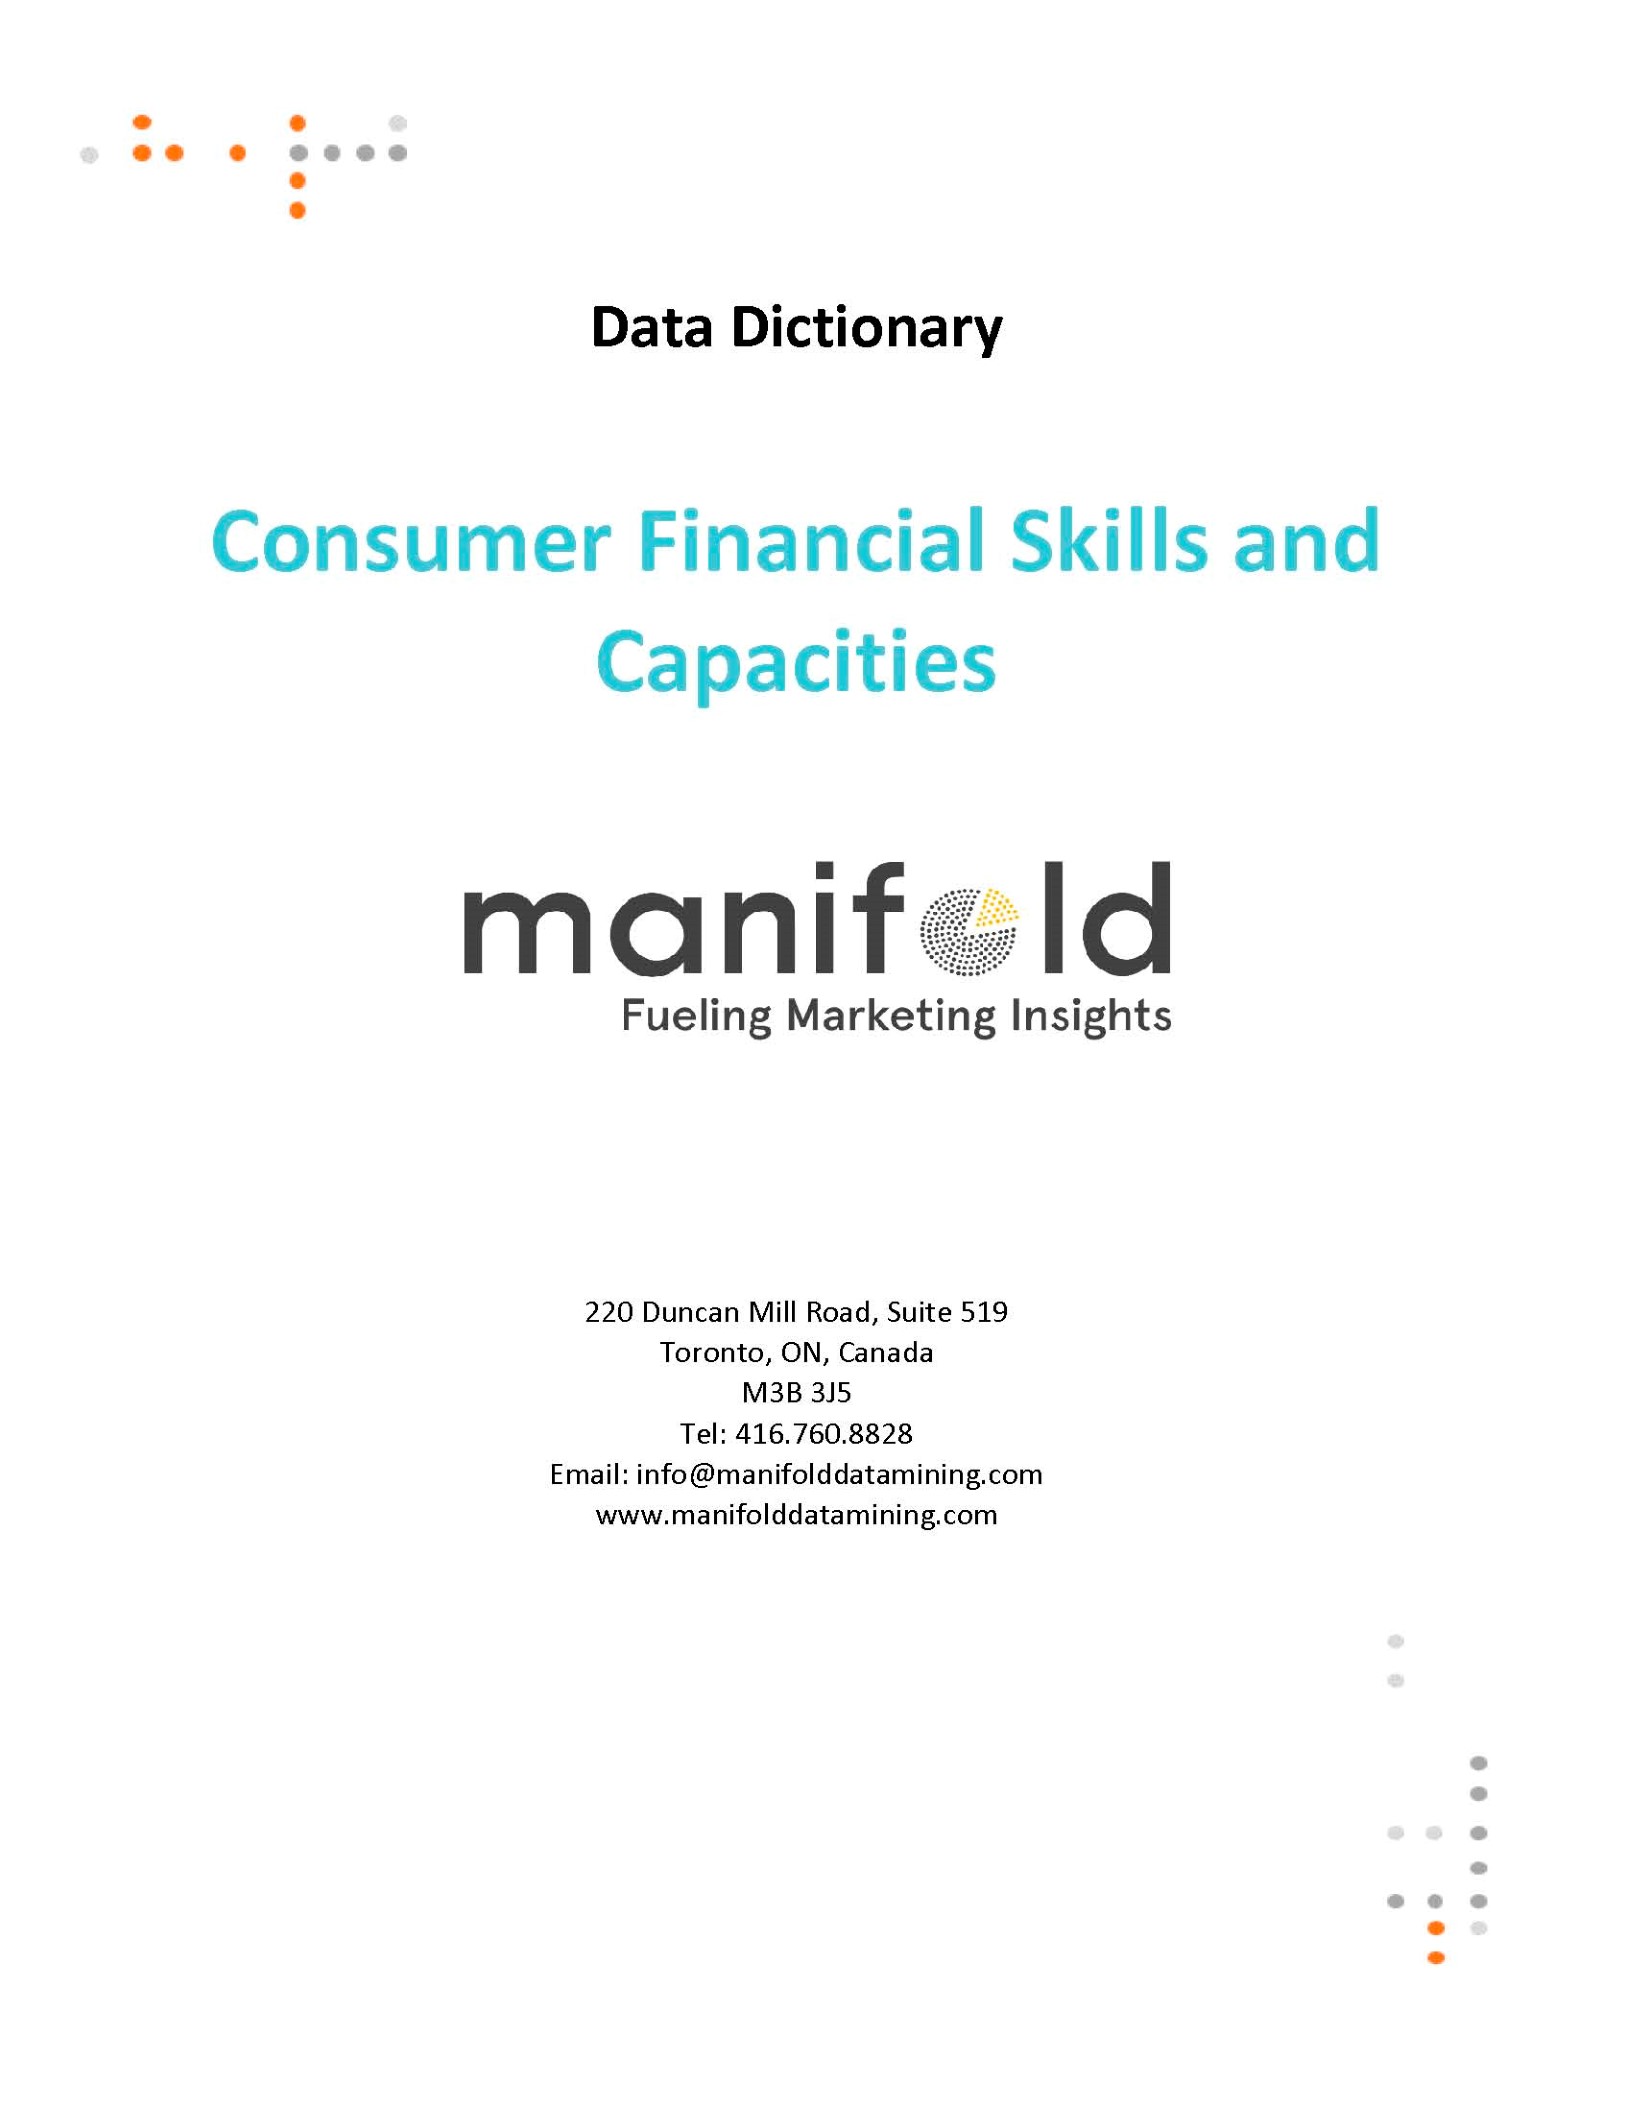 Data Dictionary Financial Skills and Capacities_Page_01